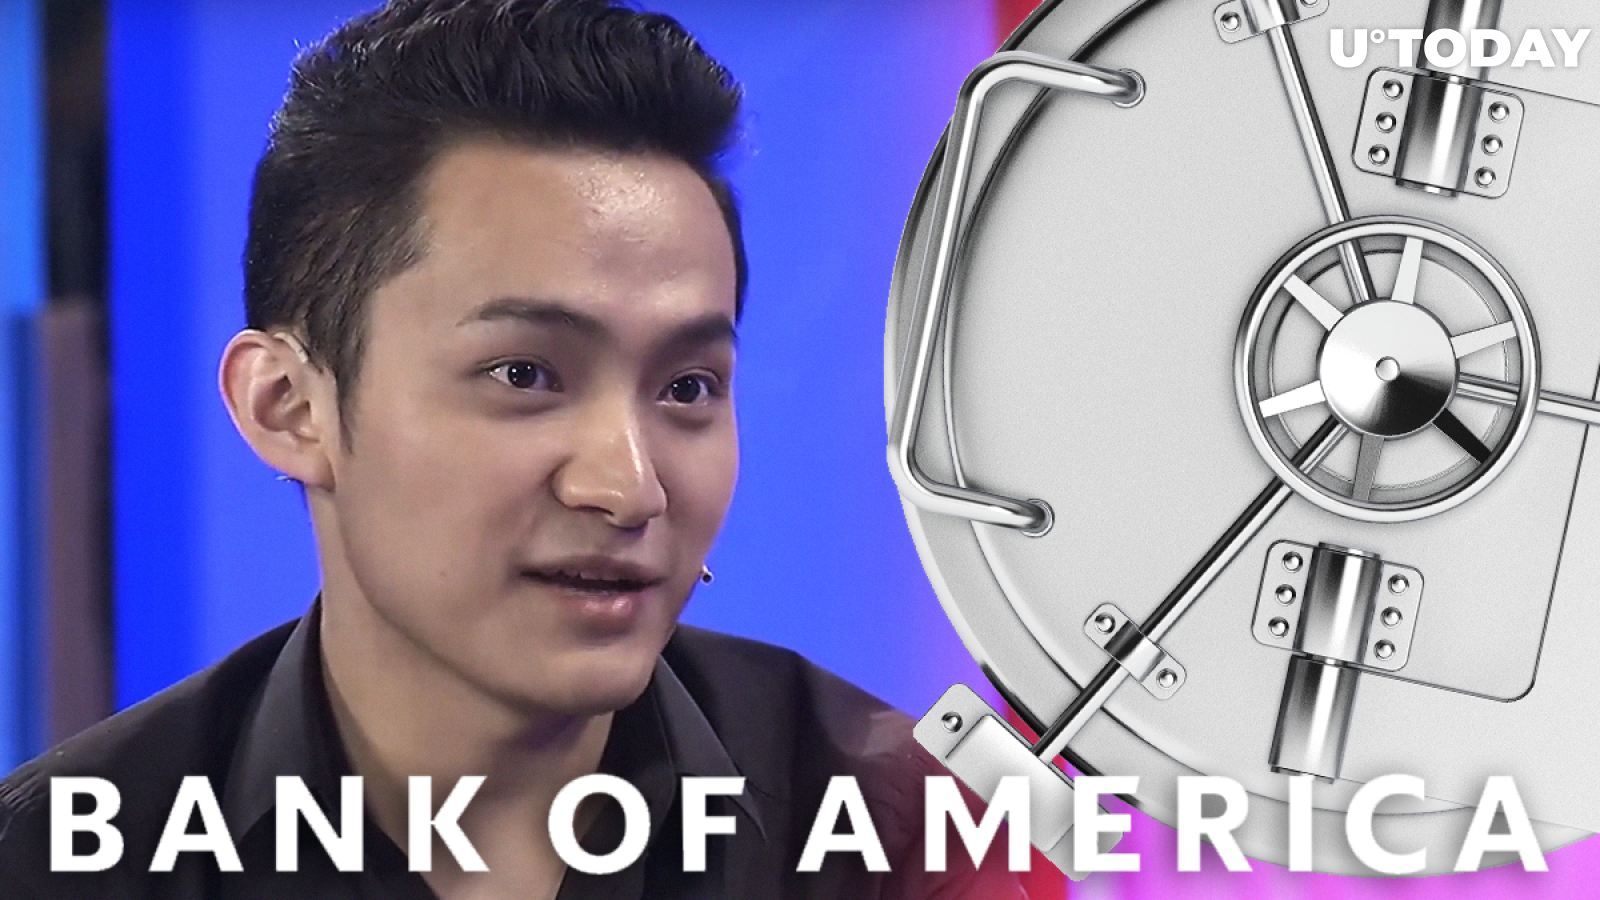 Tron CEO Justin Sun Gets His Account Closed by Bank of America after PayPal’s Roelof Botha